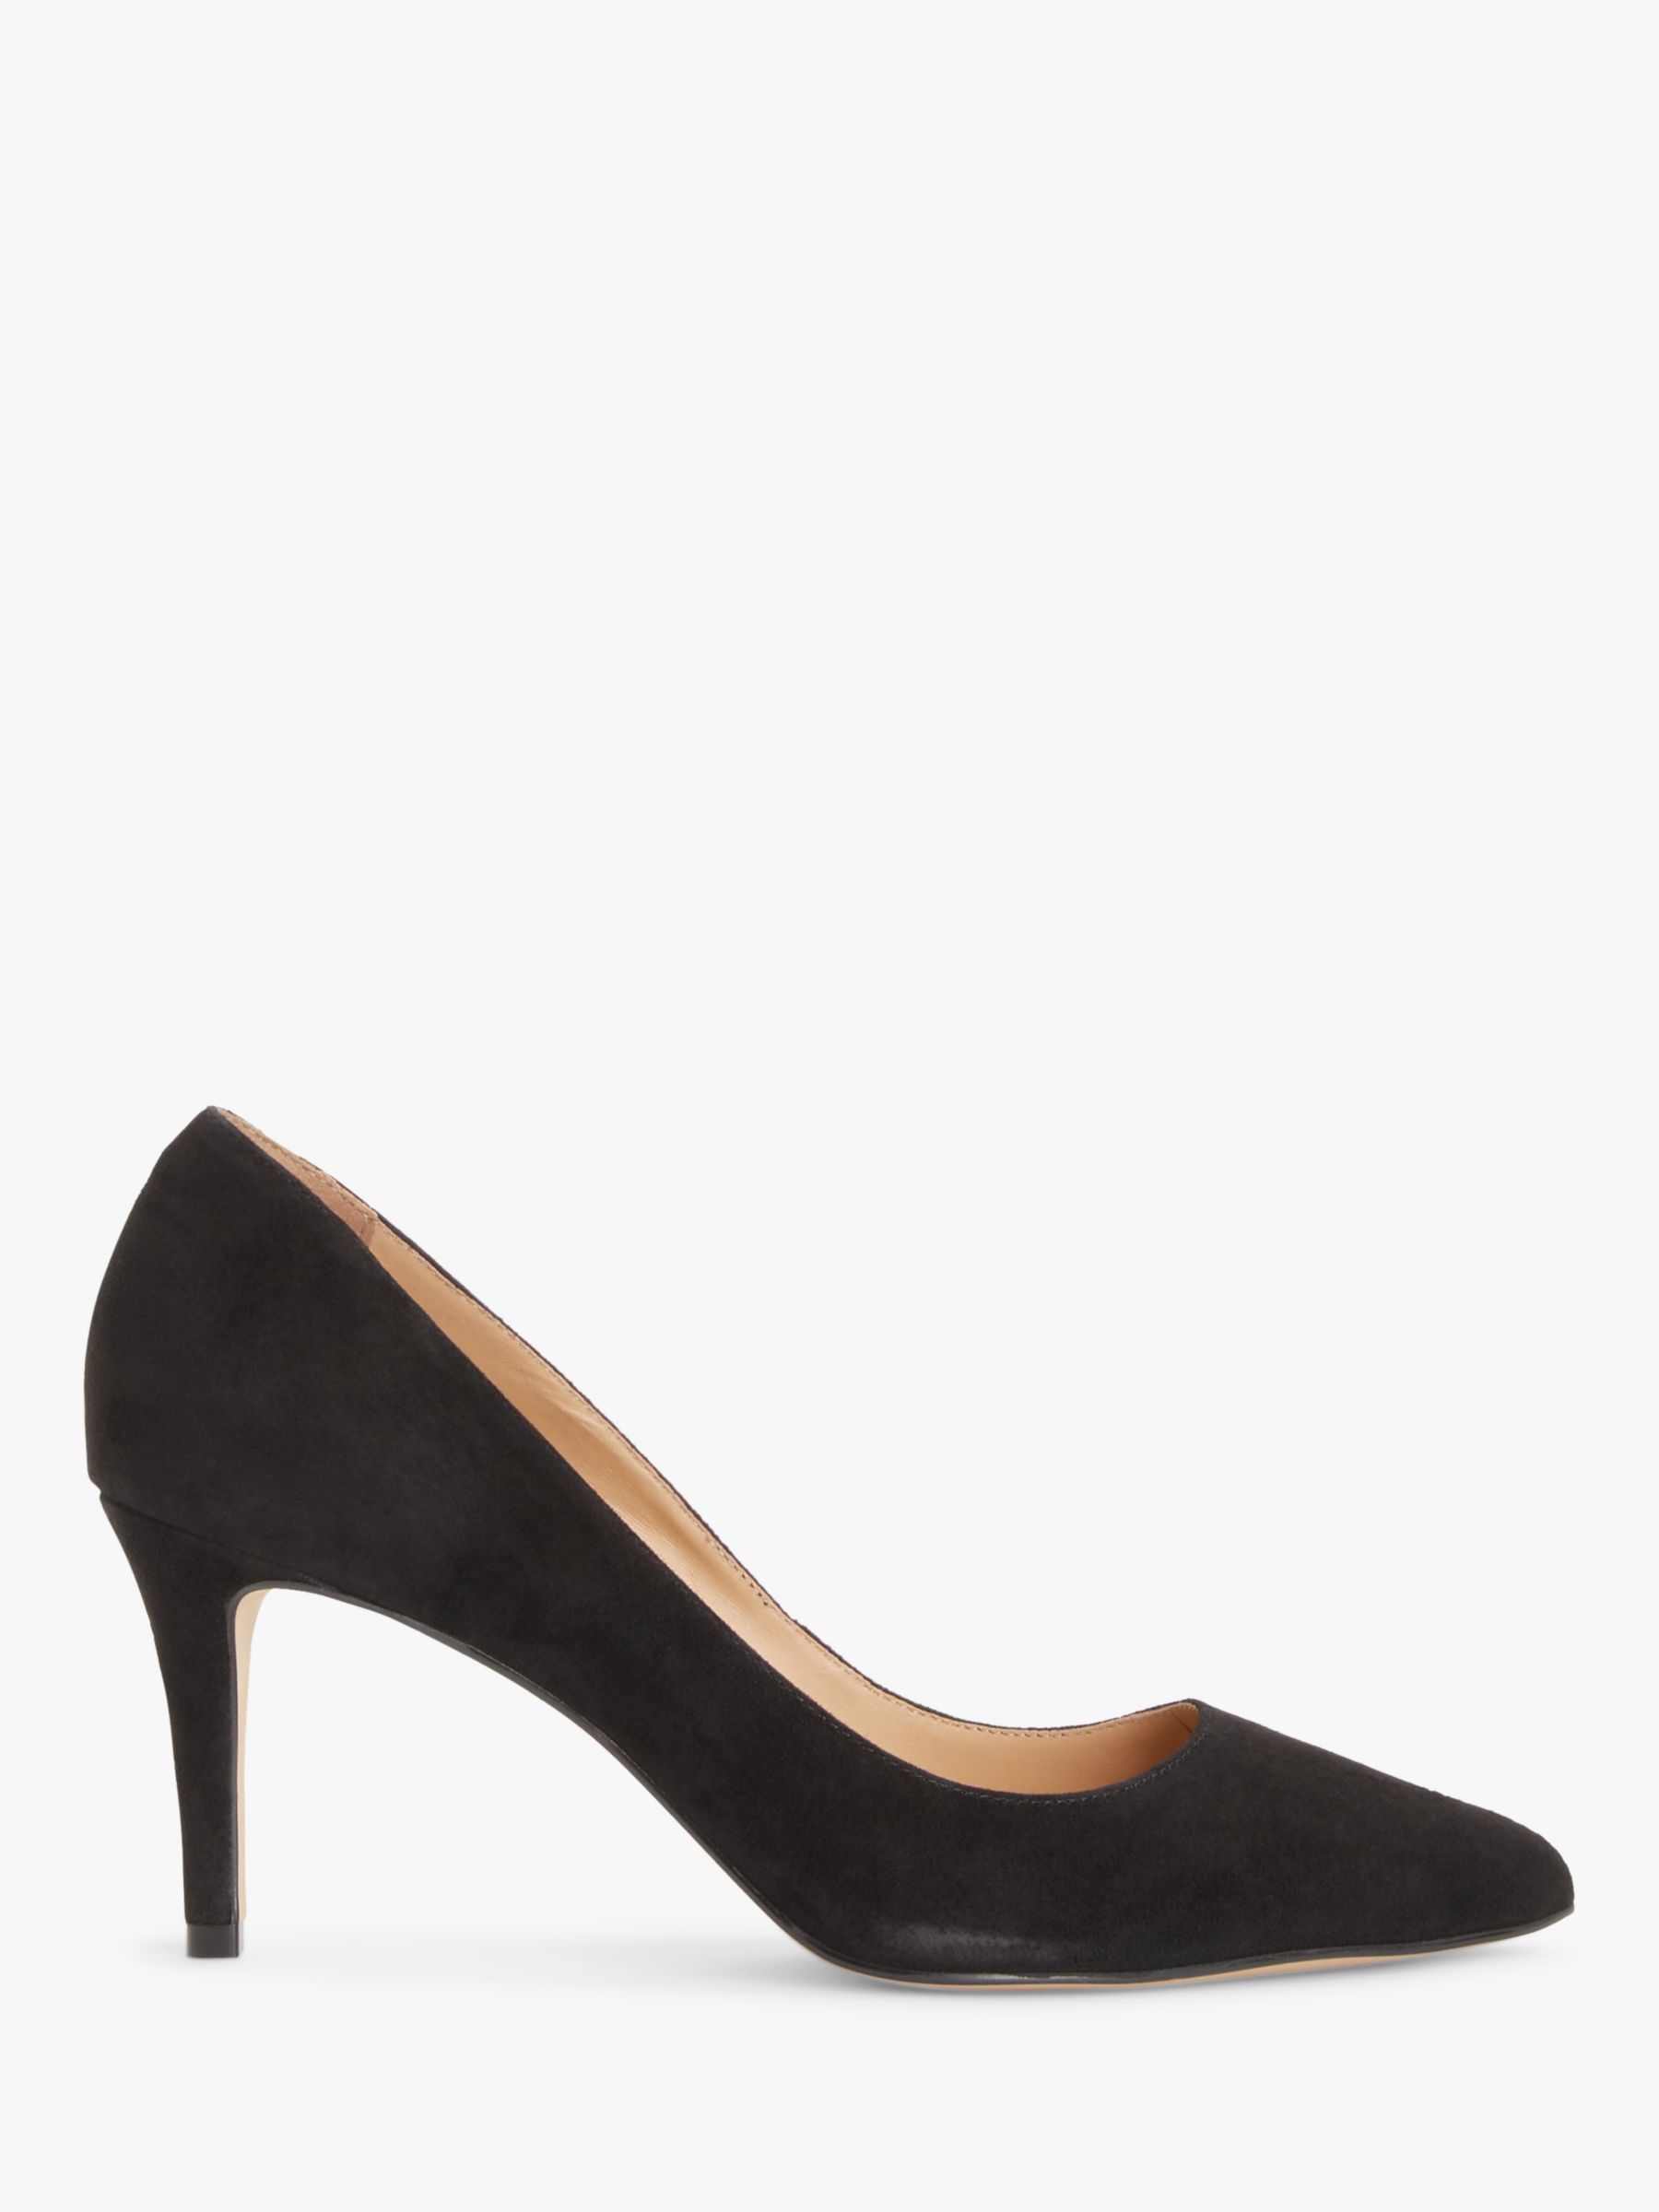 John Lewis Blessing Suede Stiletto Heel Pointed Toe Court Shoes, Black ...